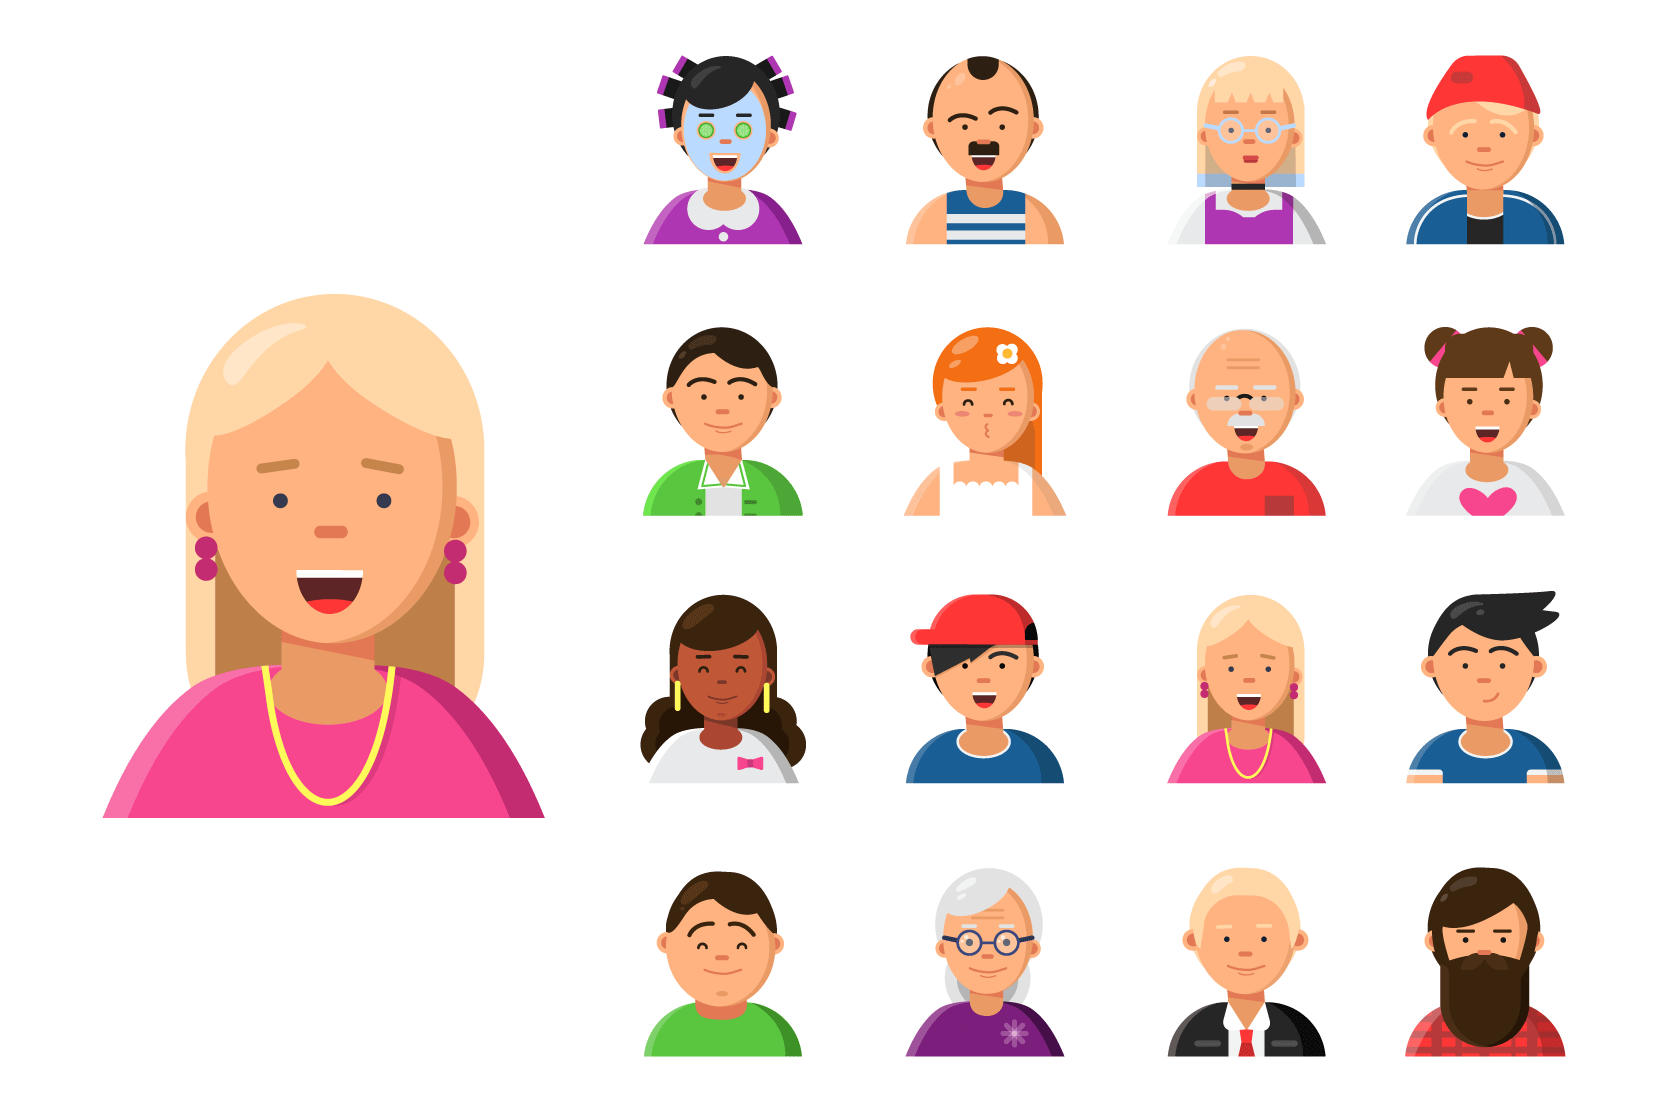 Character Faces Illustration Pack - 8 People Illustrations | SVG, PNG ...